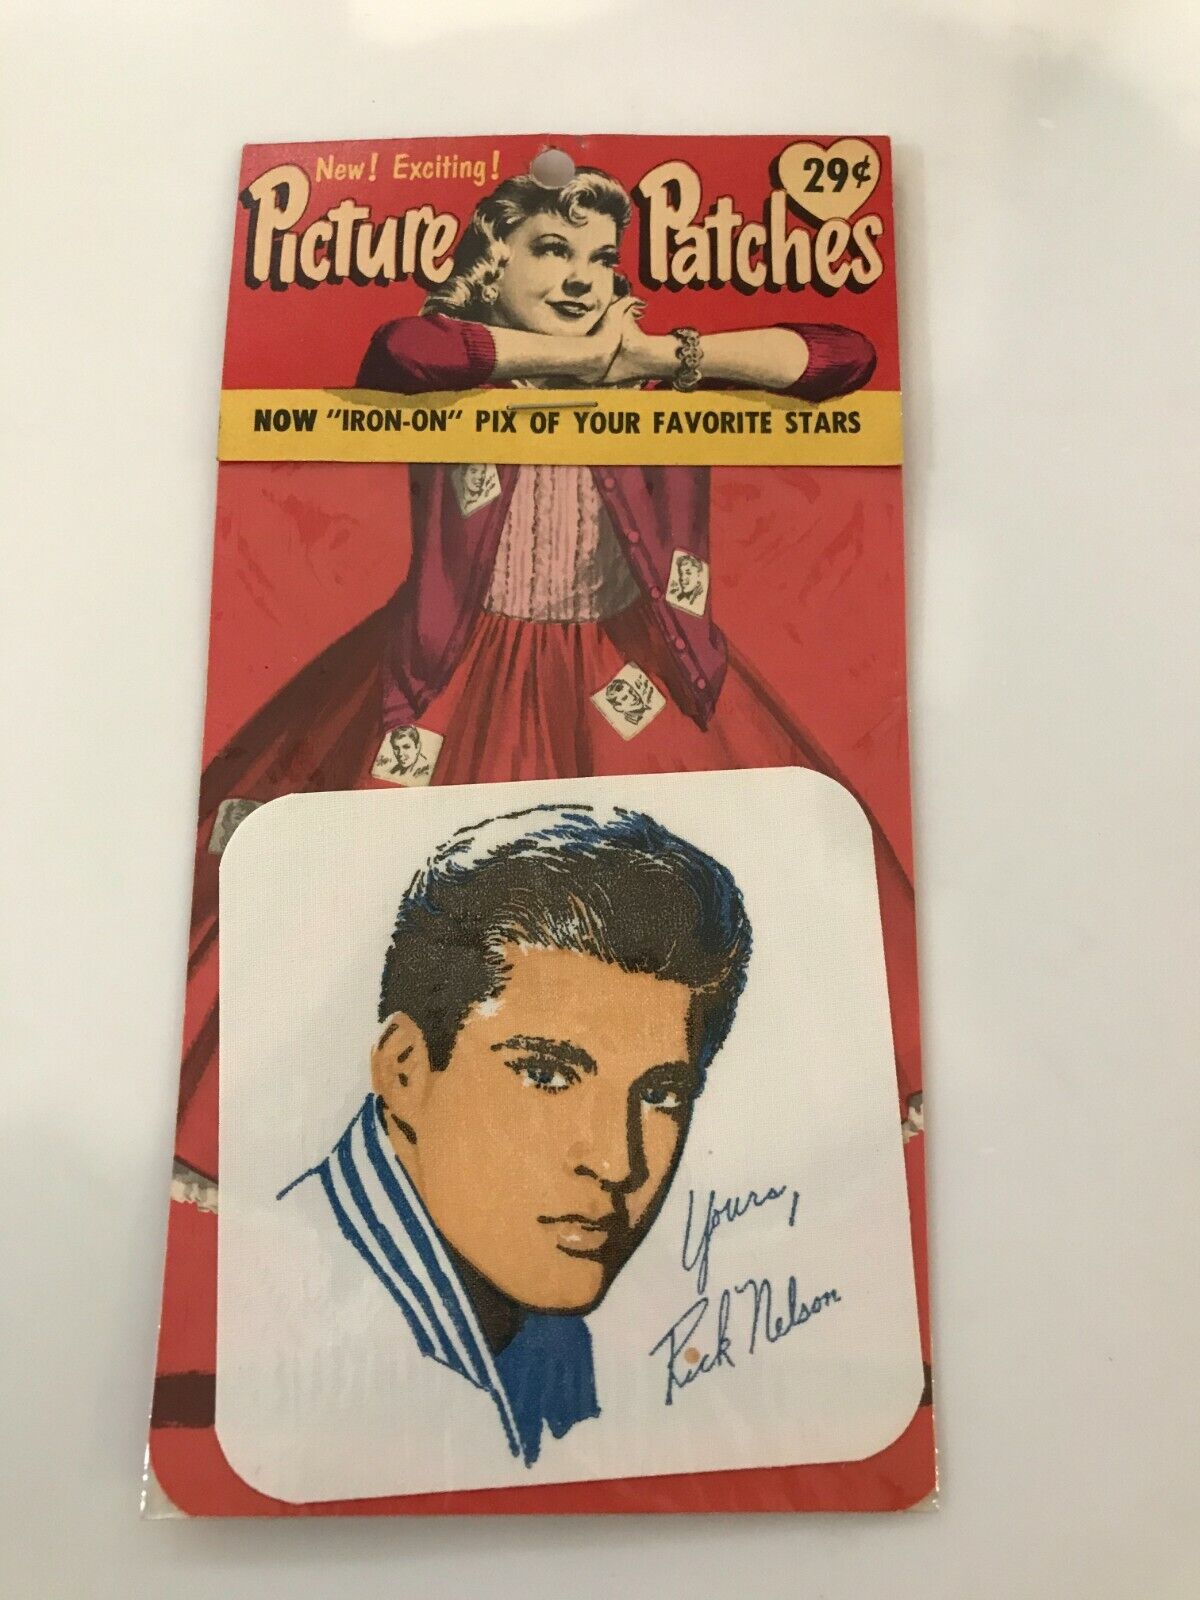 1958 Picture Patches Ricky Nelson iron patch, still in shrink wrap